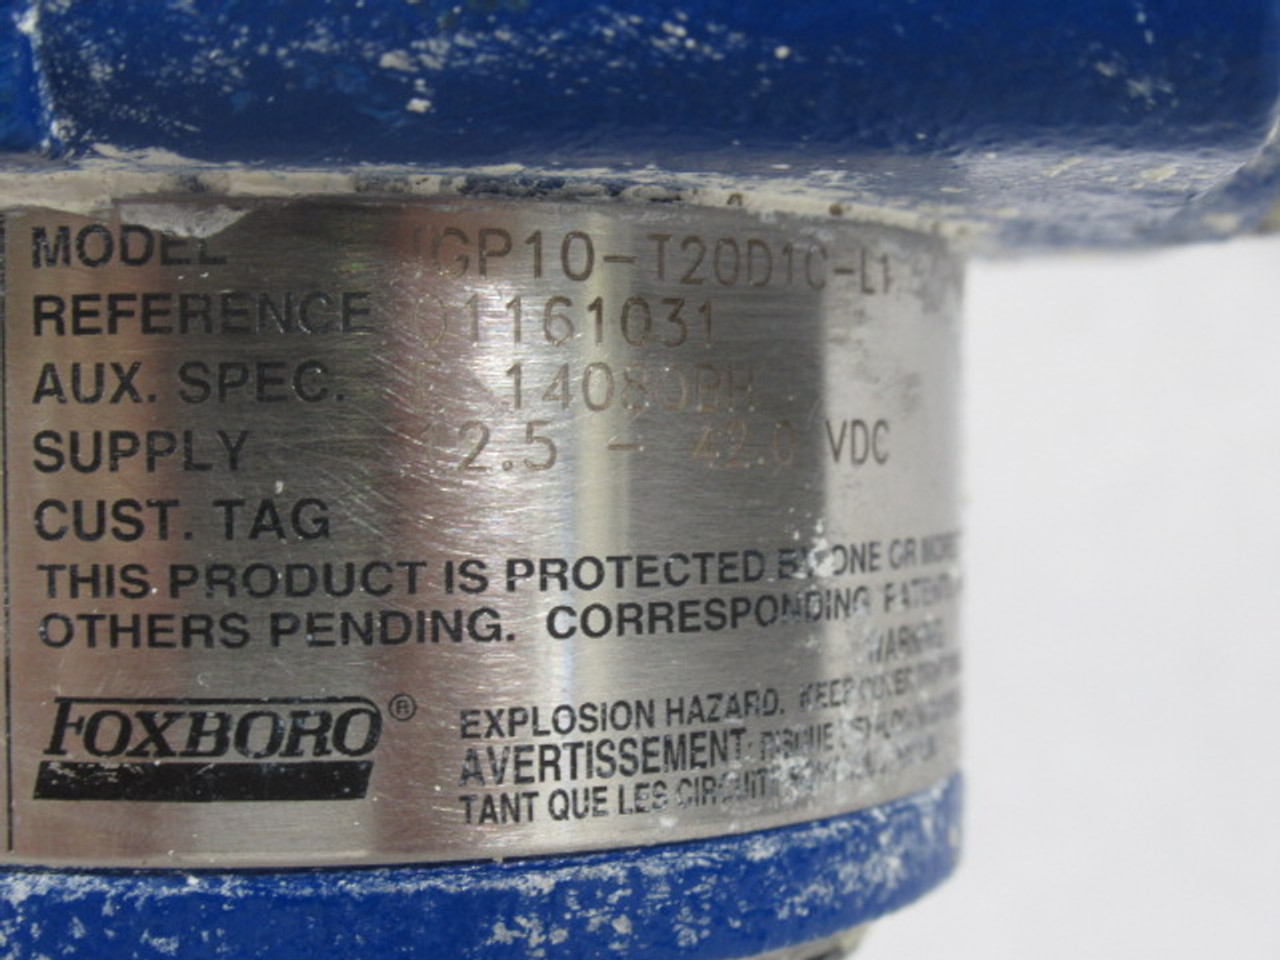 Foxboro IGP10-T20D1C-L1 Pressure Transmitter Supply 12.5-42VDC ST:A USED